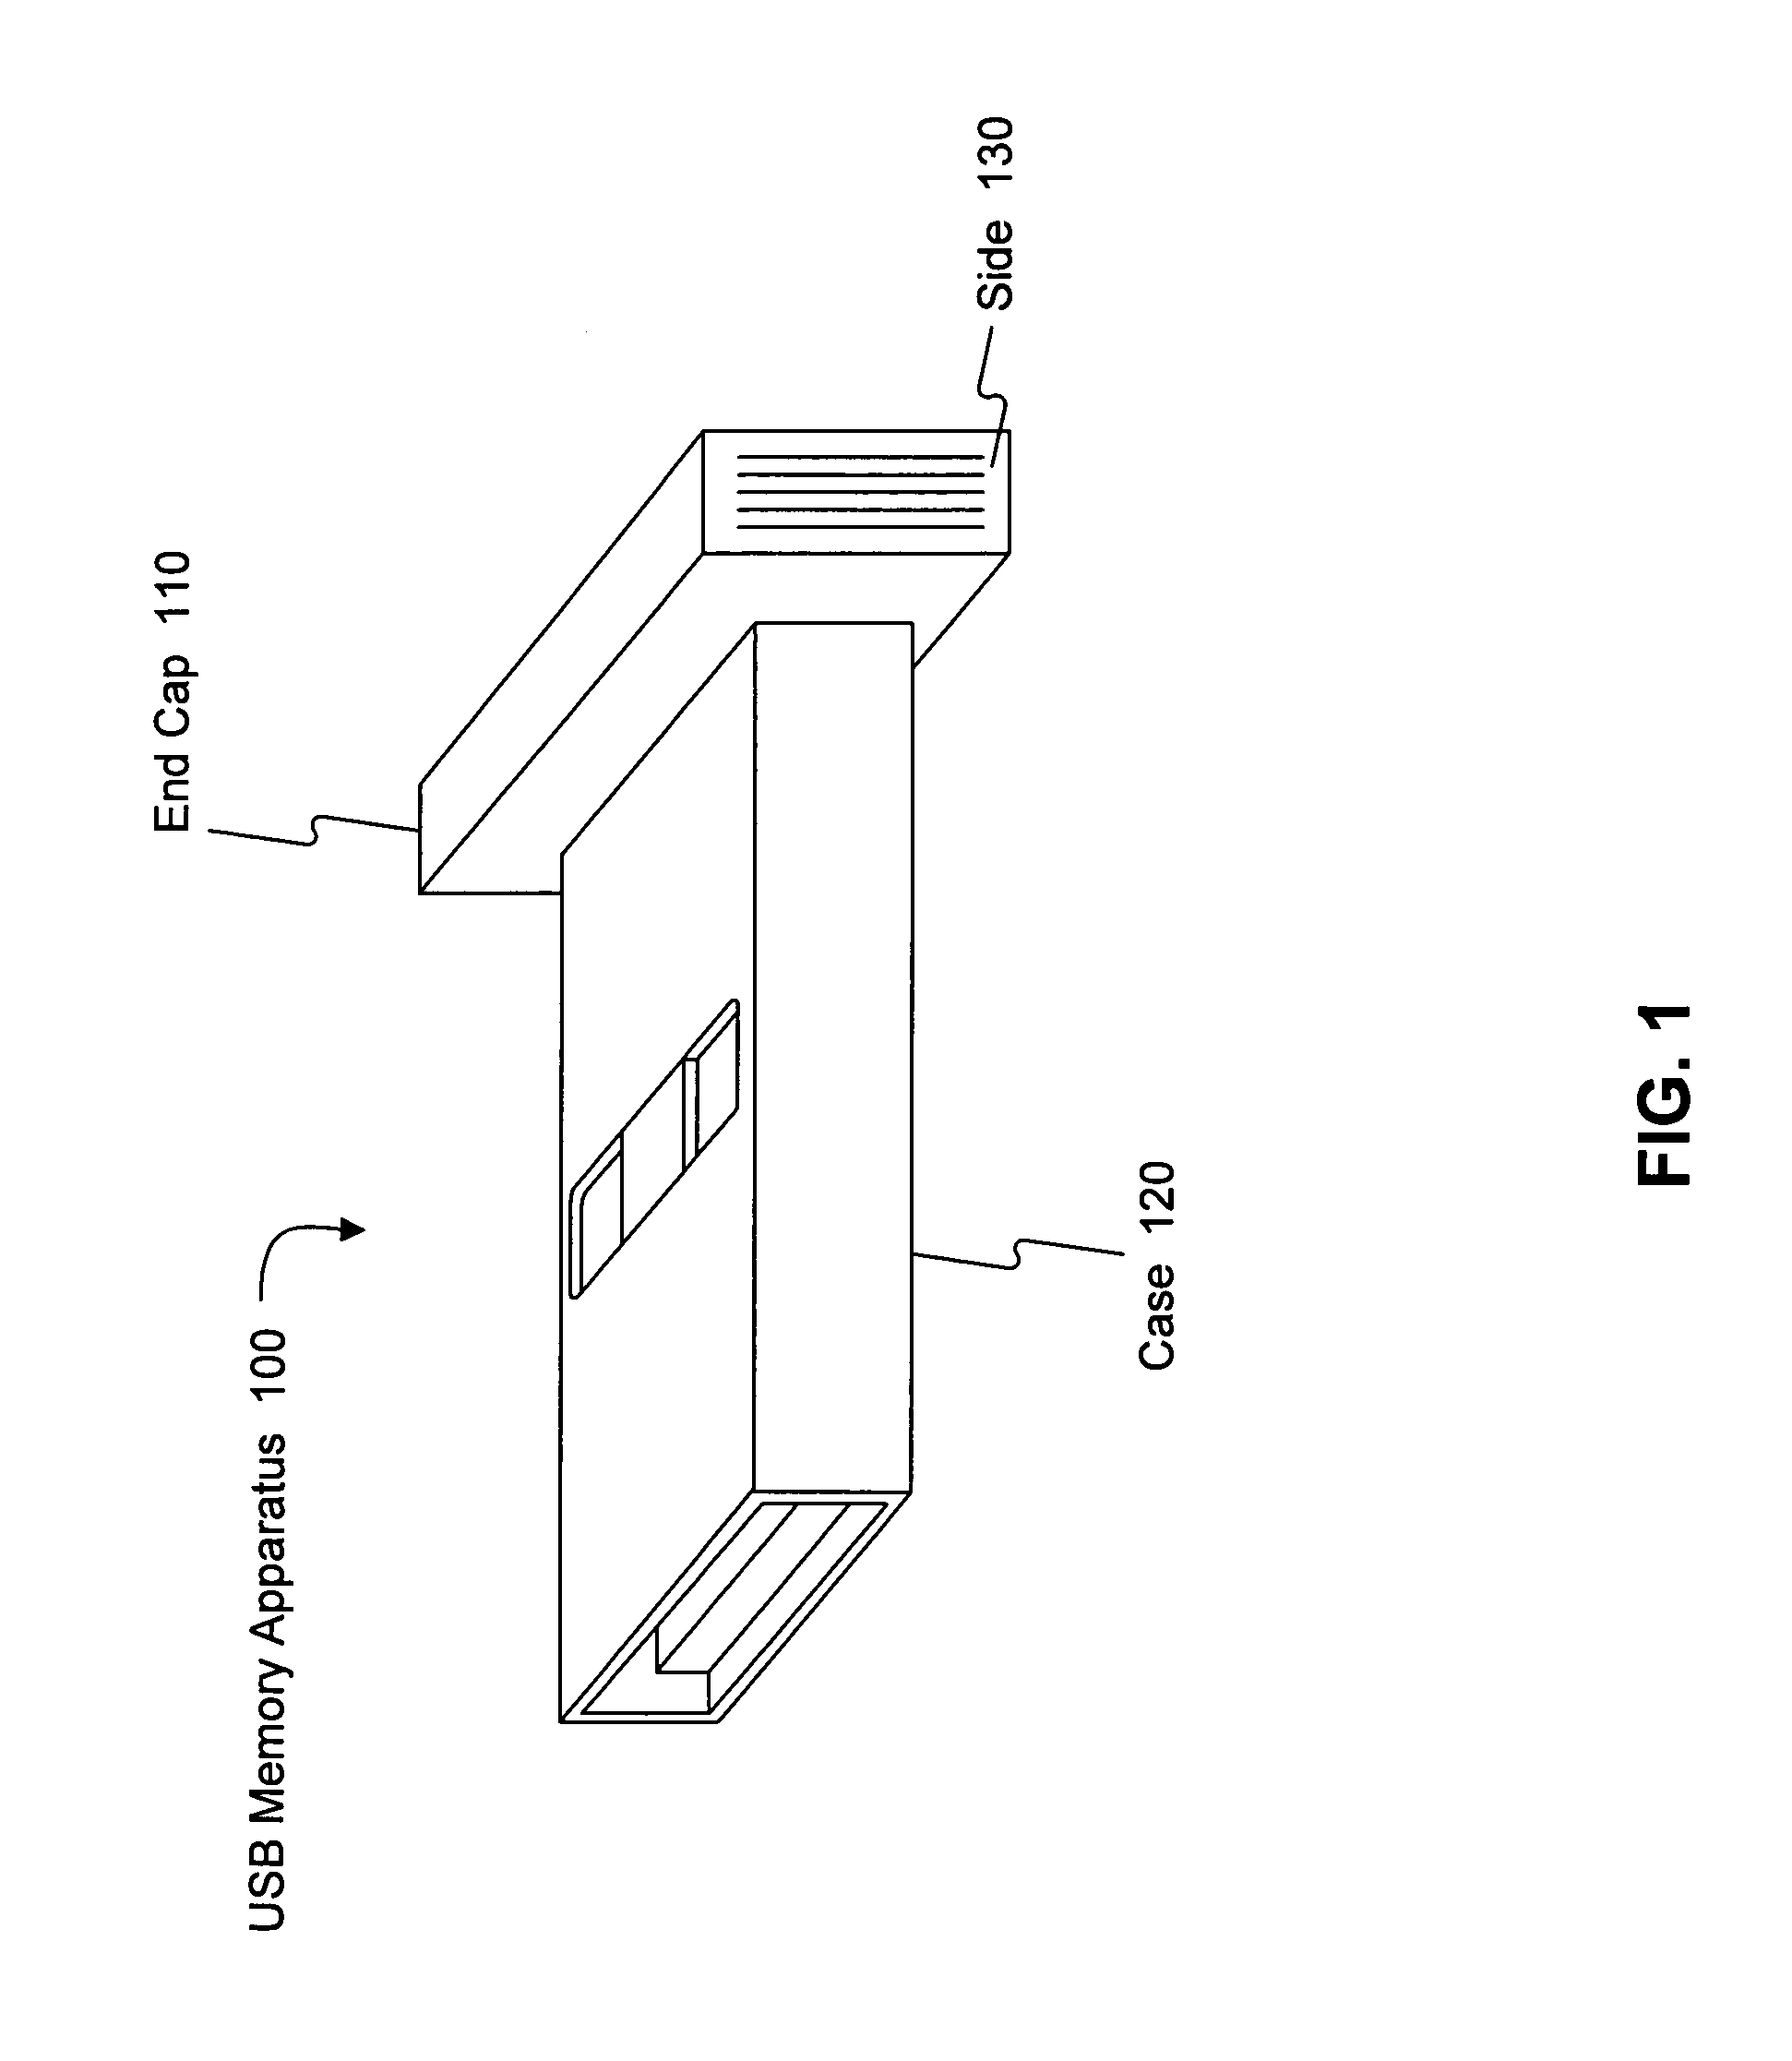 USB memory storage apparatus with integrated circuit in a connector